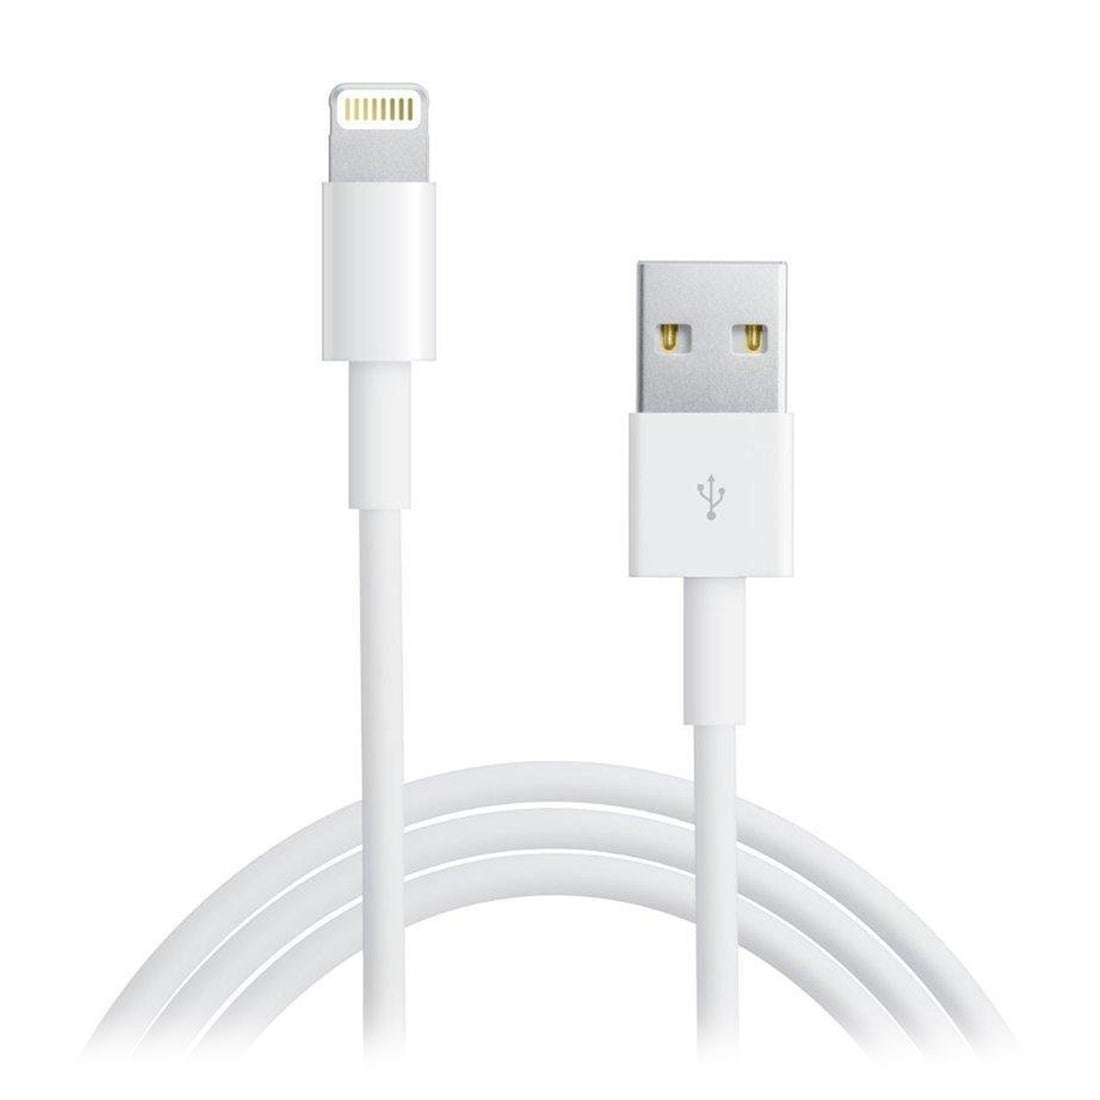 CABLE USB VERS LIGHTNING 2 METRES